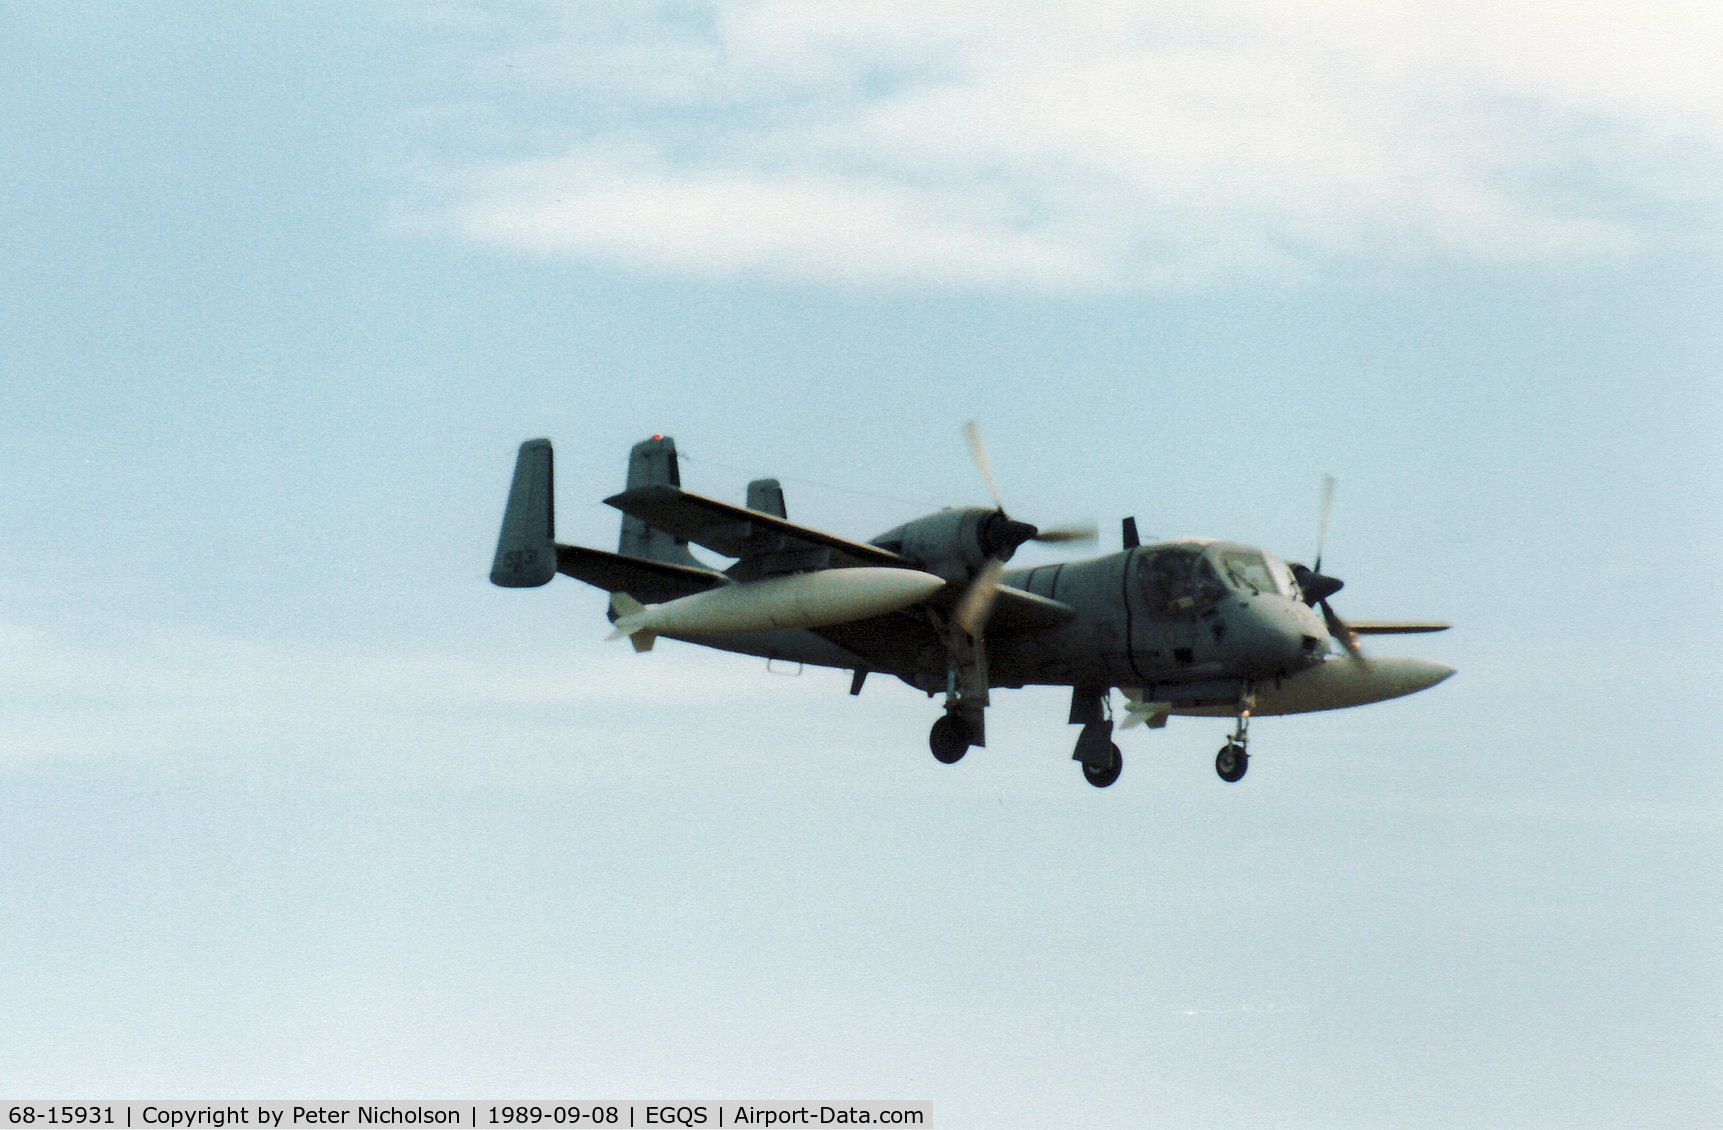 68-15931, 1968 Grumman OV-1D Mohawk C/N 135C, OV-1D Mohawk of the 3rd Military Intelligence Battalion on final approach to RAF Lossiemouth in September 1989.